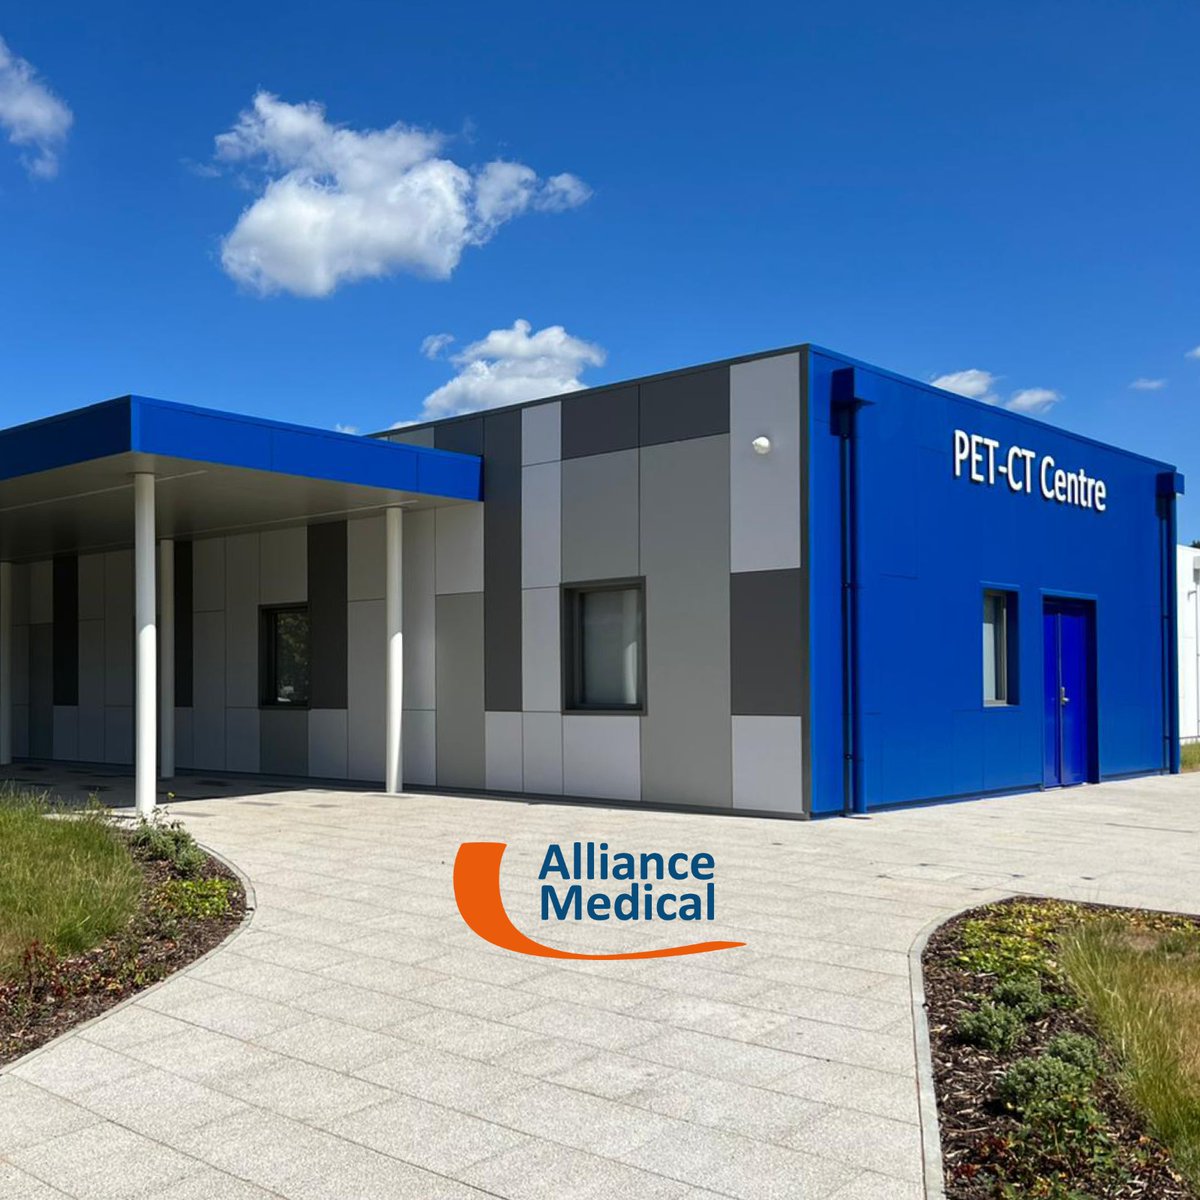 The doors are open at our NEW PET-CT centre in Guildford, based at @SurreyRP

We have an incredible GE Discovery MI 5-Ring Gen 2 Digital PET-CT scanner, one of just two in the UK. Learn more: bit.ly/3Qj4UWv
 
#PETCT #DedicatedToDiagnostics @RoyalSurrey #trustedNHSpartner